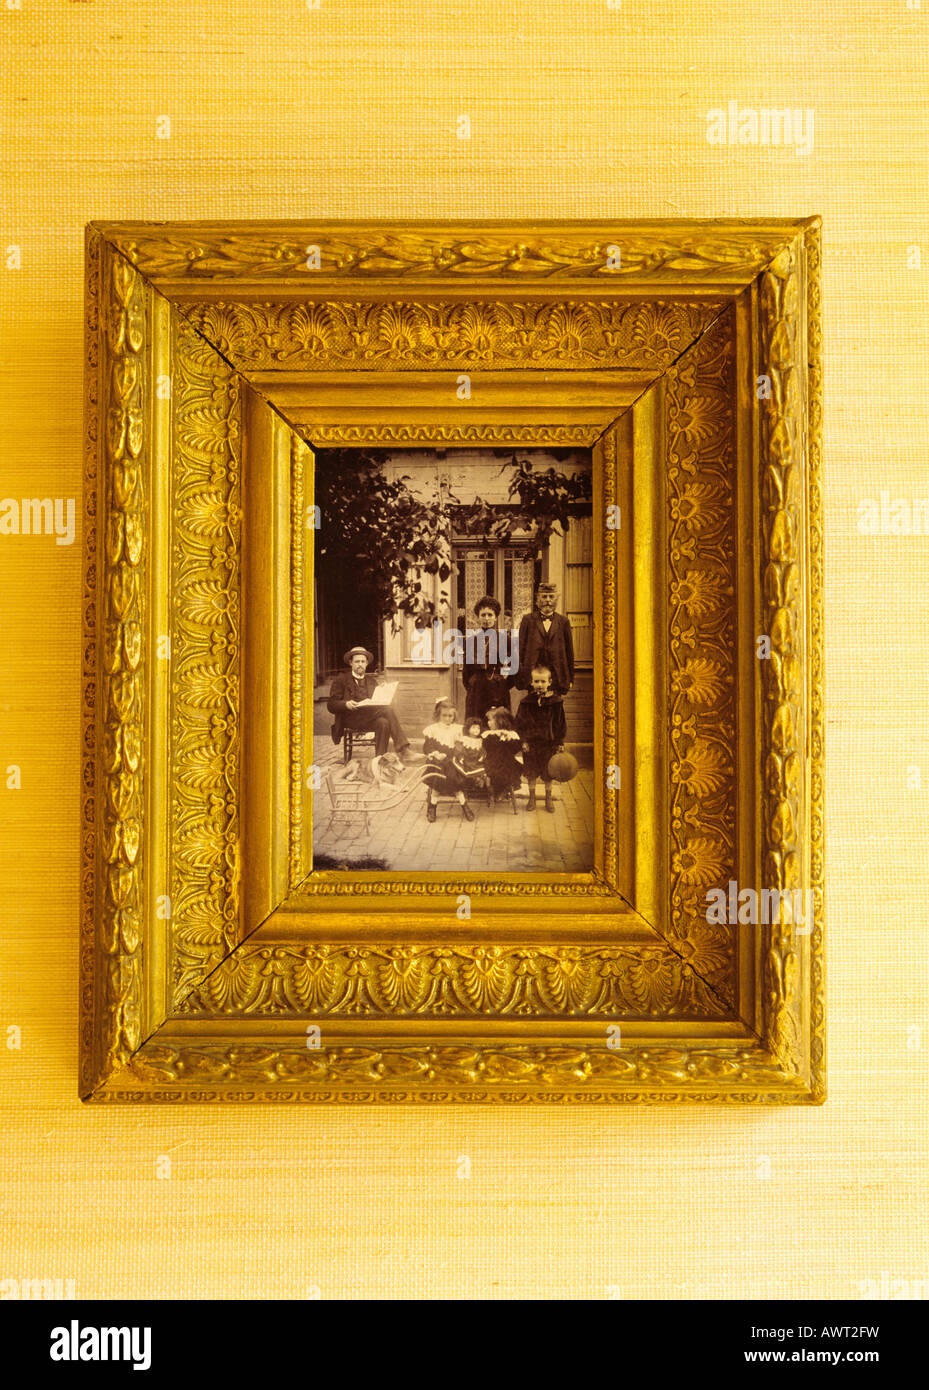 1905's vintage photo of a family in a golden frame Stock Photo